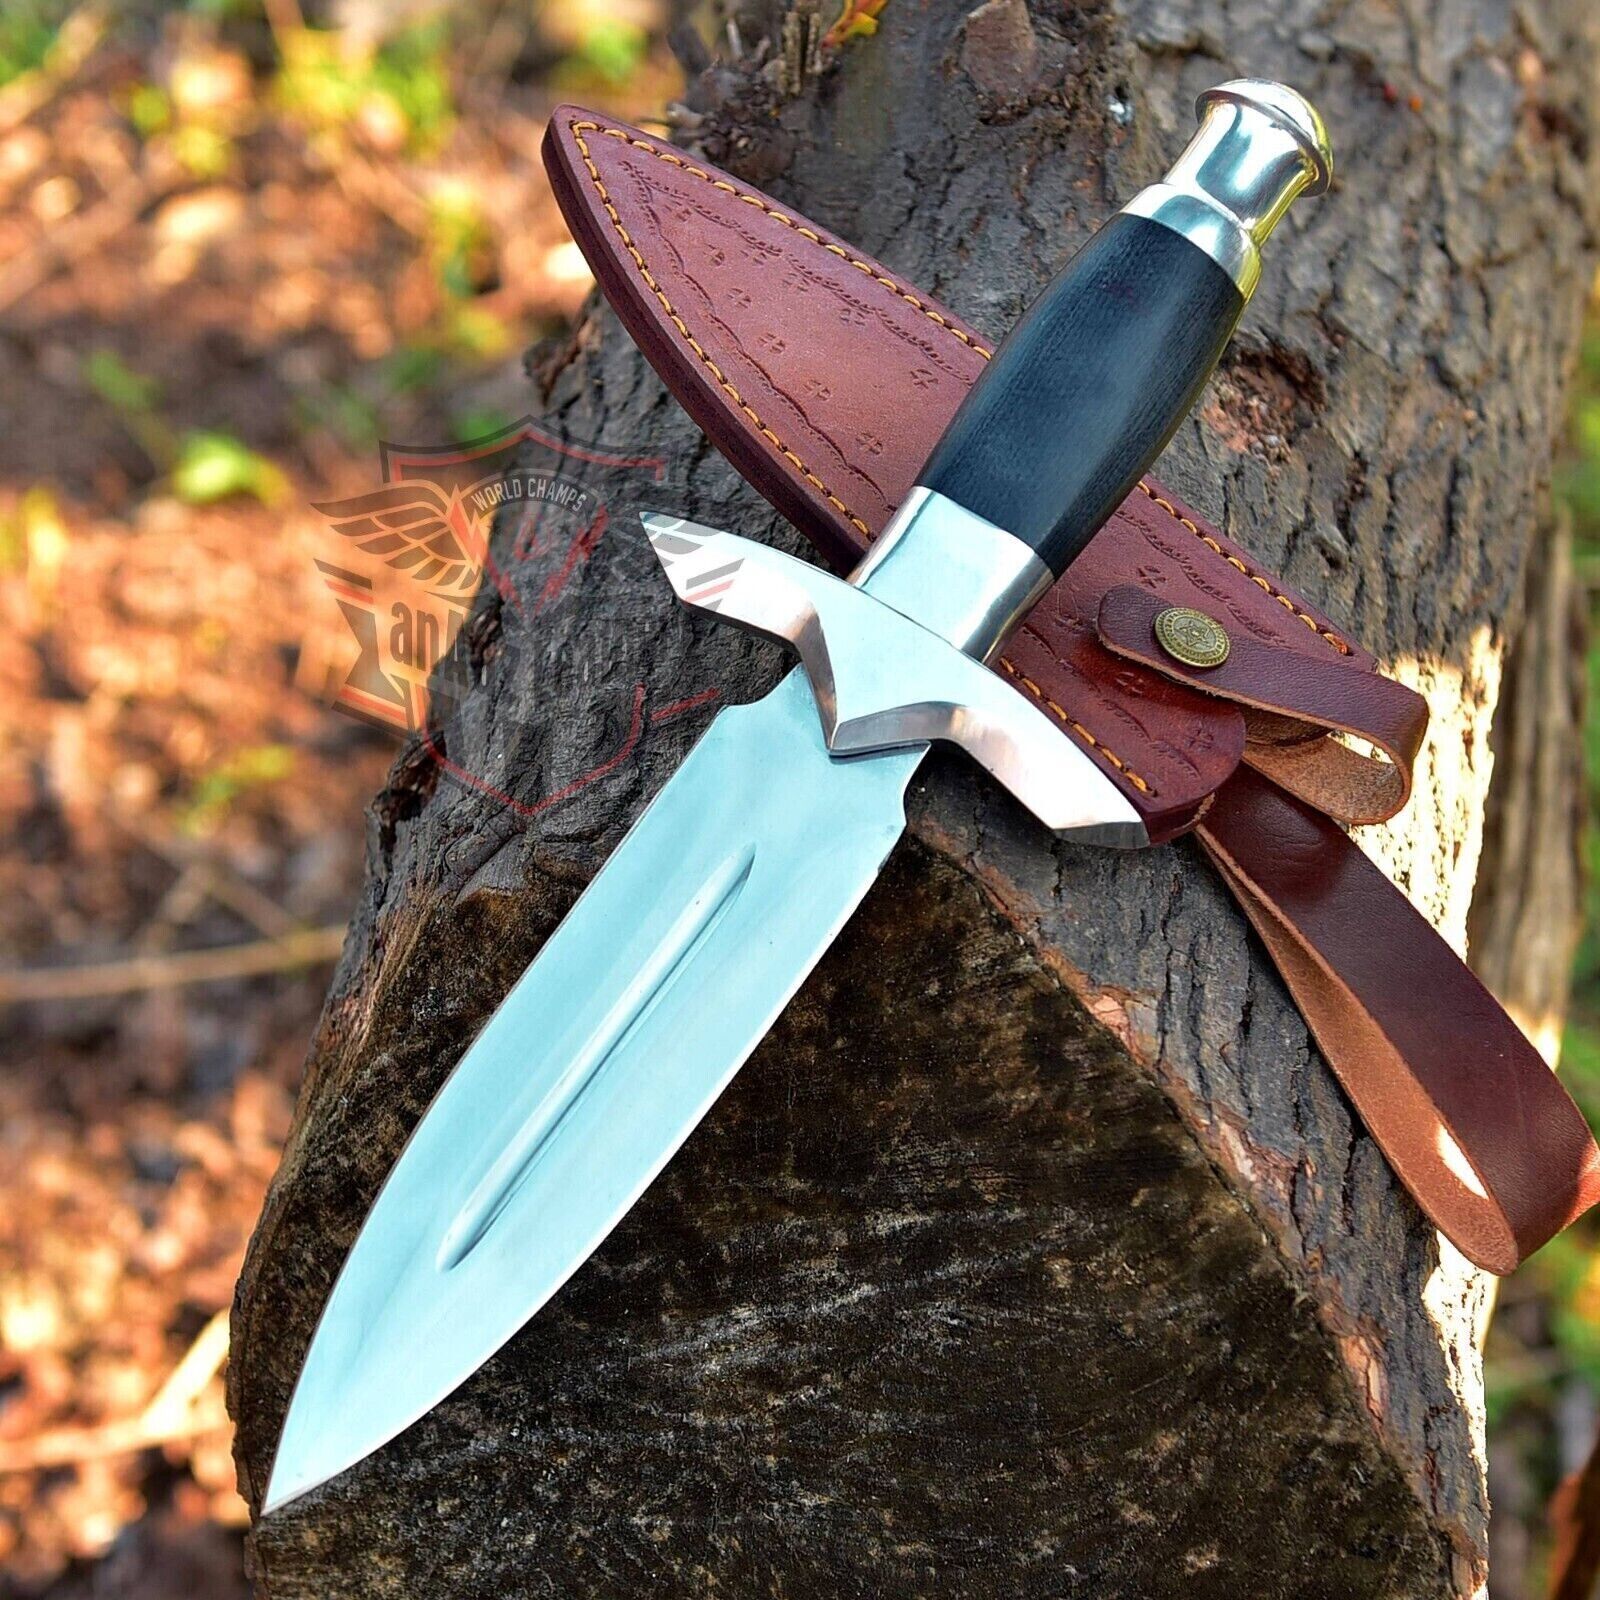 HAND-CRAFTED D2 STEEL HUNTING DAGGER BOWIE KNIFE - WITH MICARTA HANDLE & SHEATH